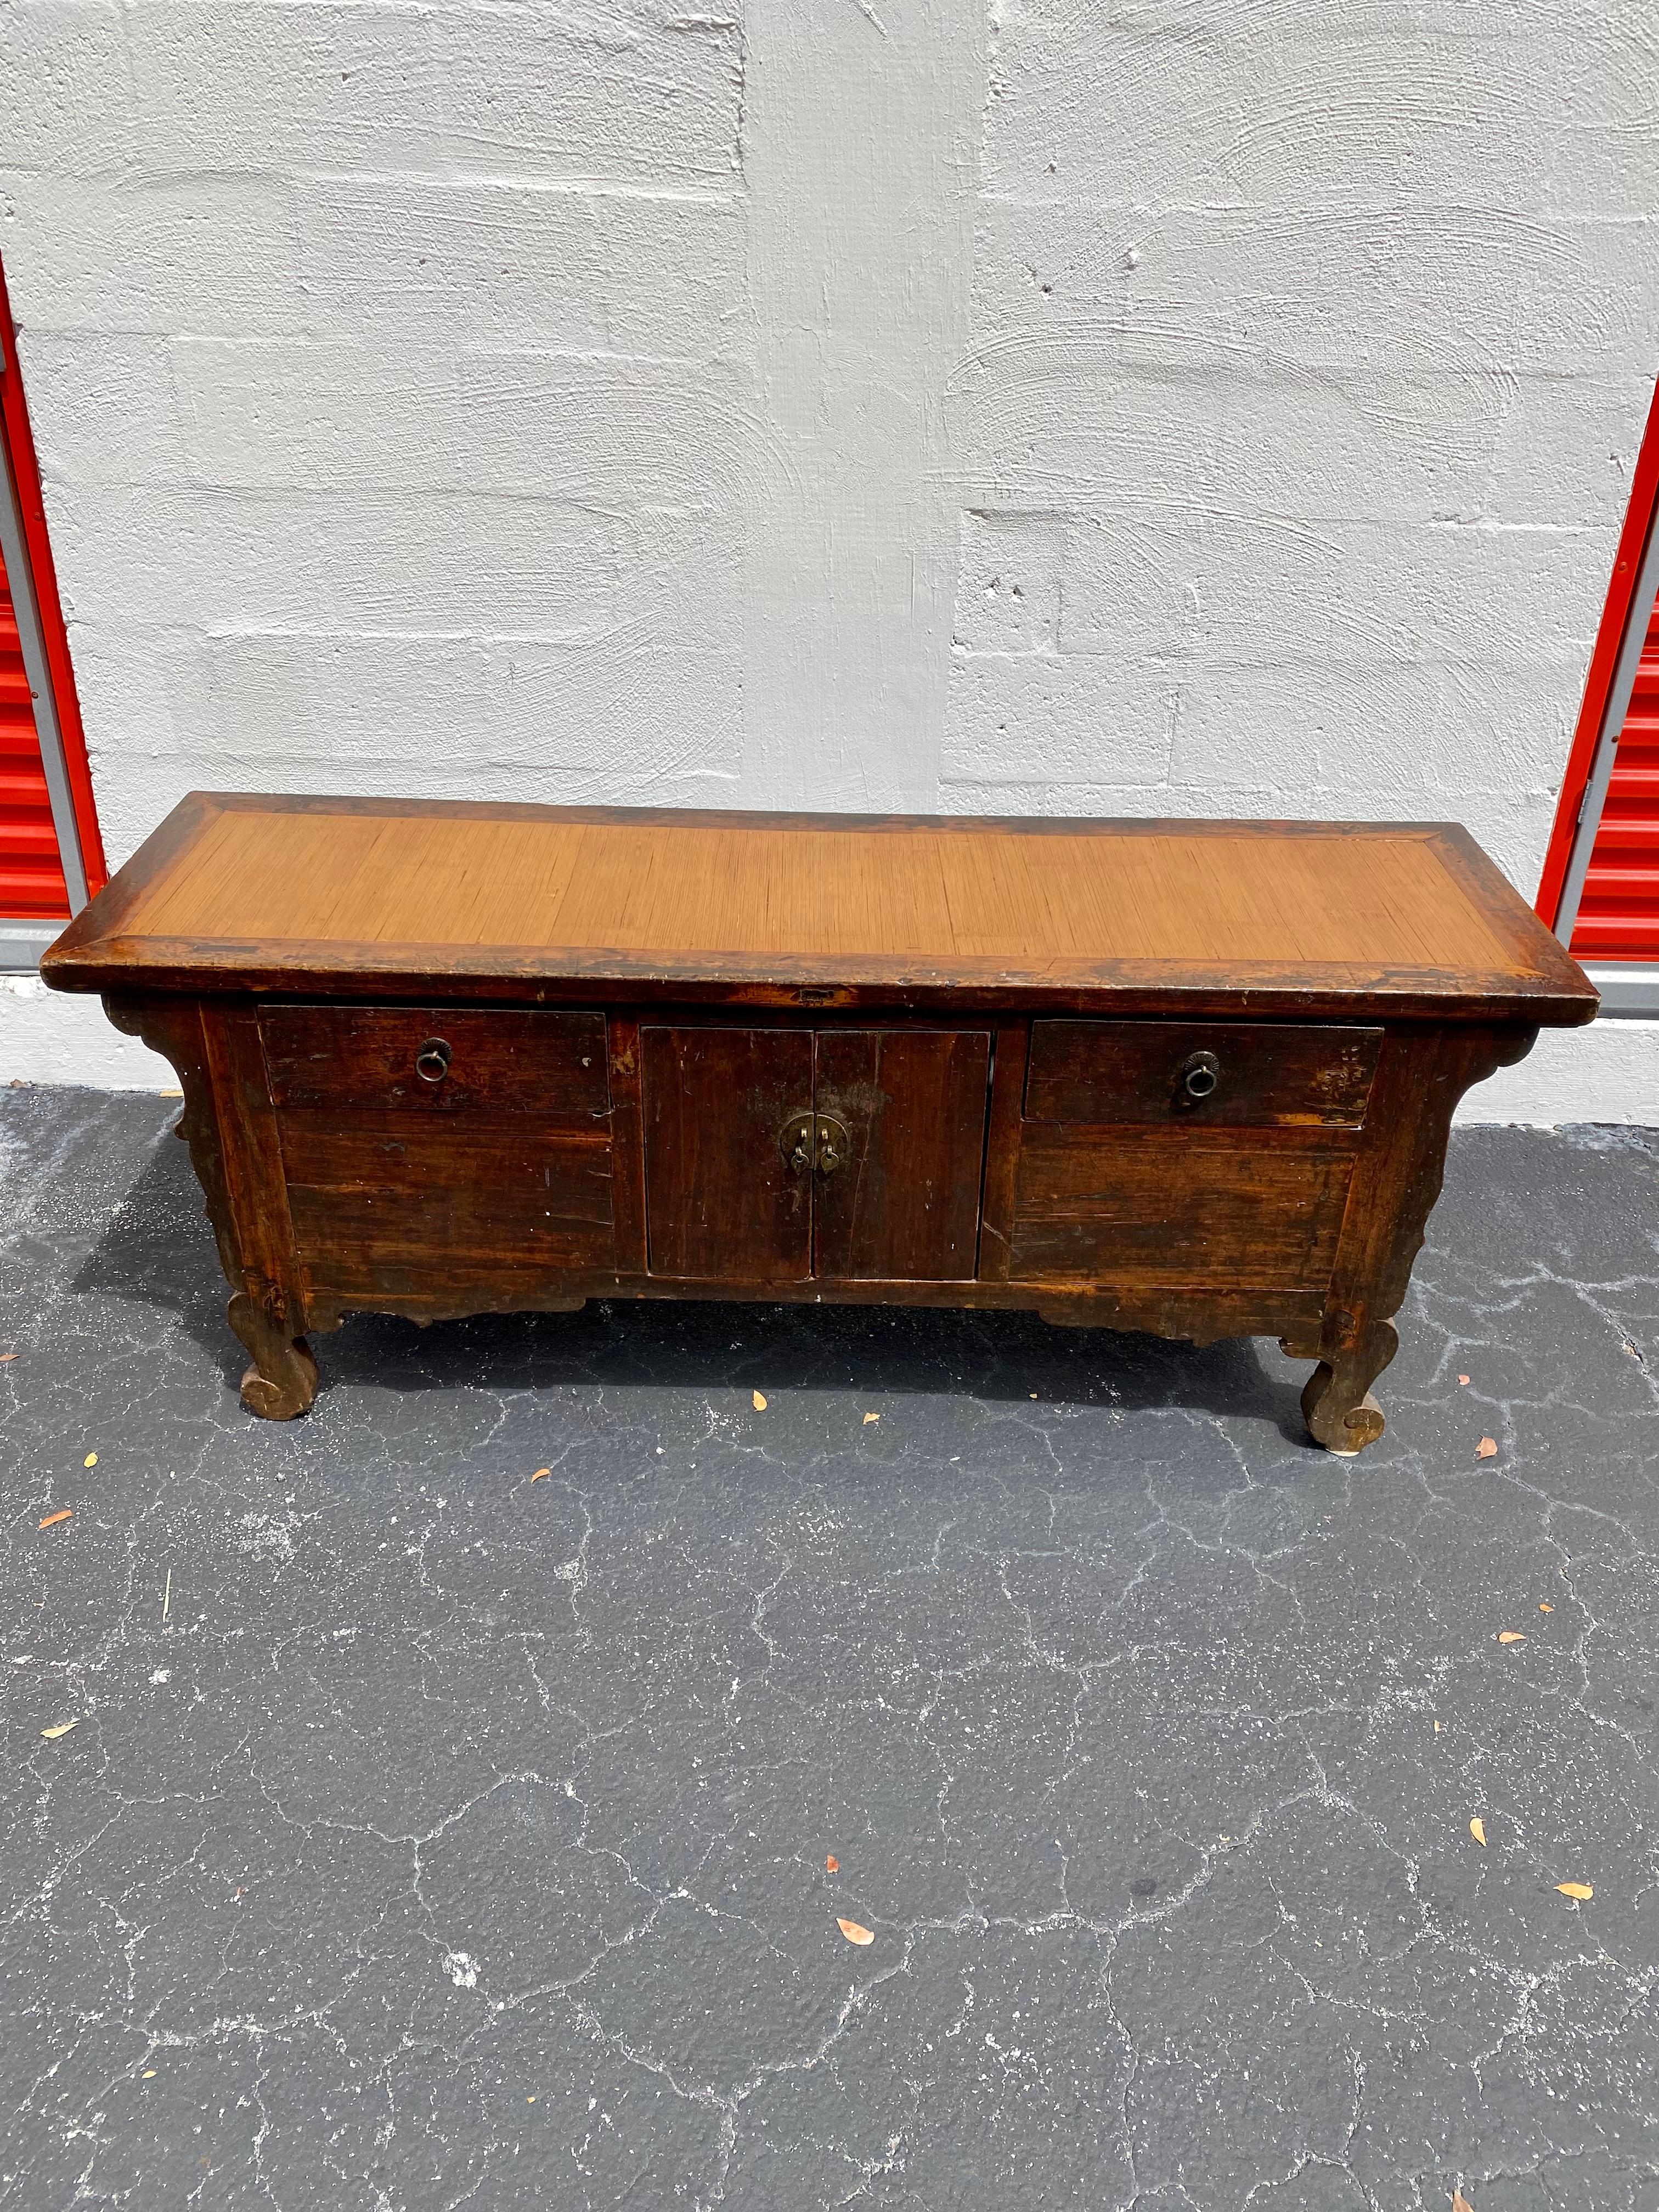 On offer on this occasion is one of the most stunning and rare, sideboard storage cabinet you could hope to find. Outstanding design is exhibited throughout. The beautiful cabinet is statement piece and packed with personality!! Just look at the